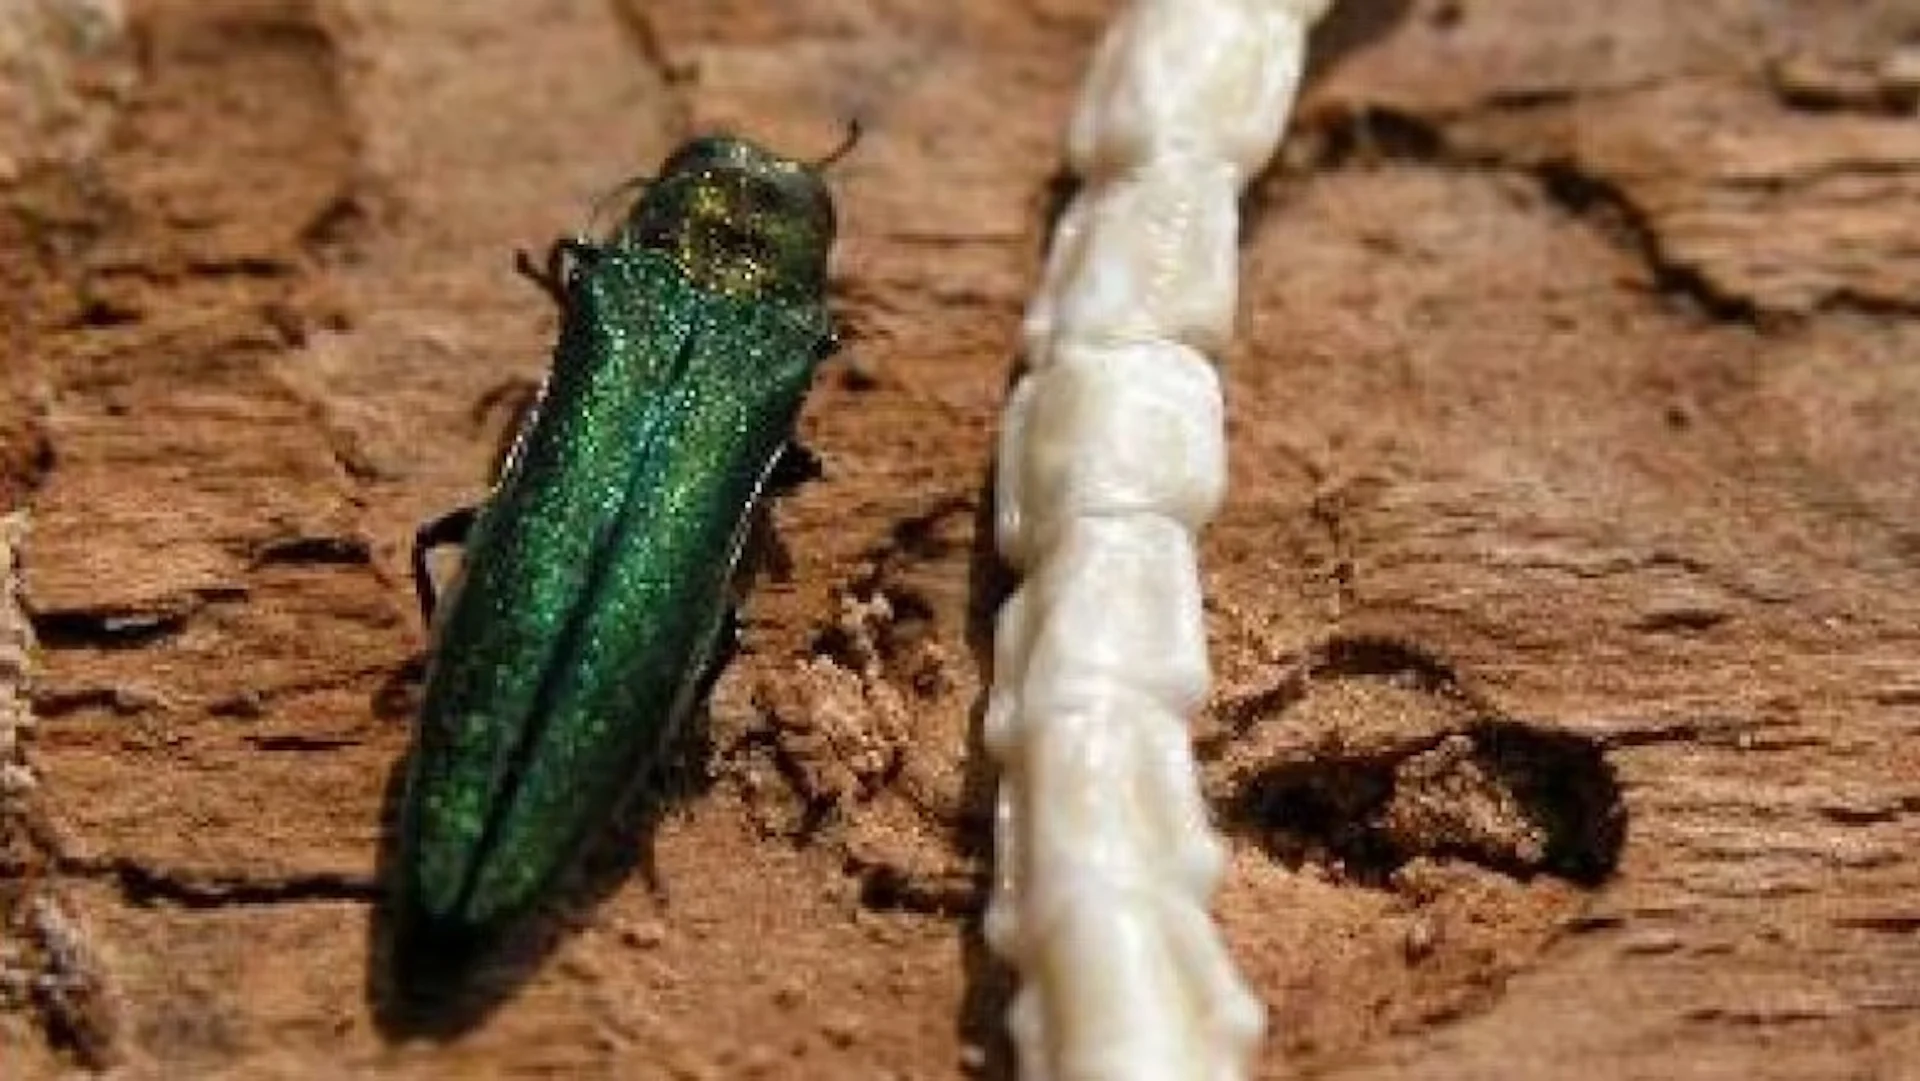 Emerald ash borer has killed millions of trees. Calgary bracing for its arrival